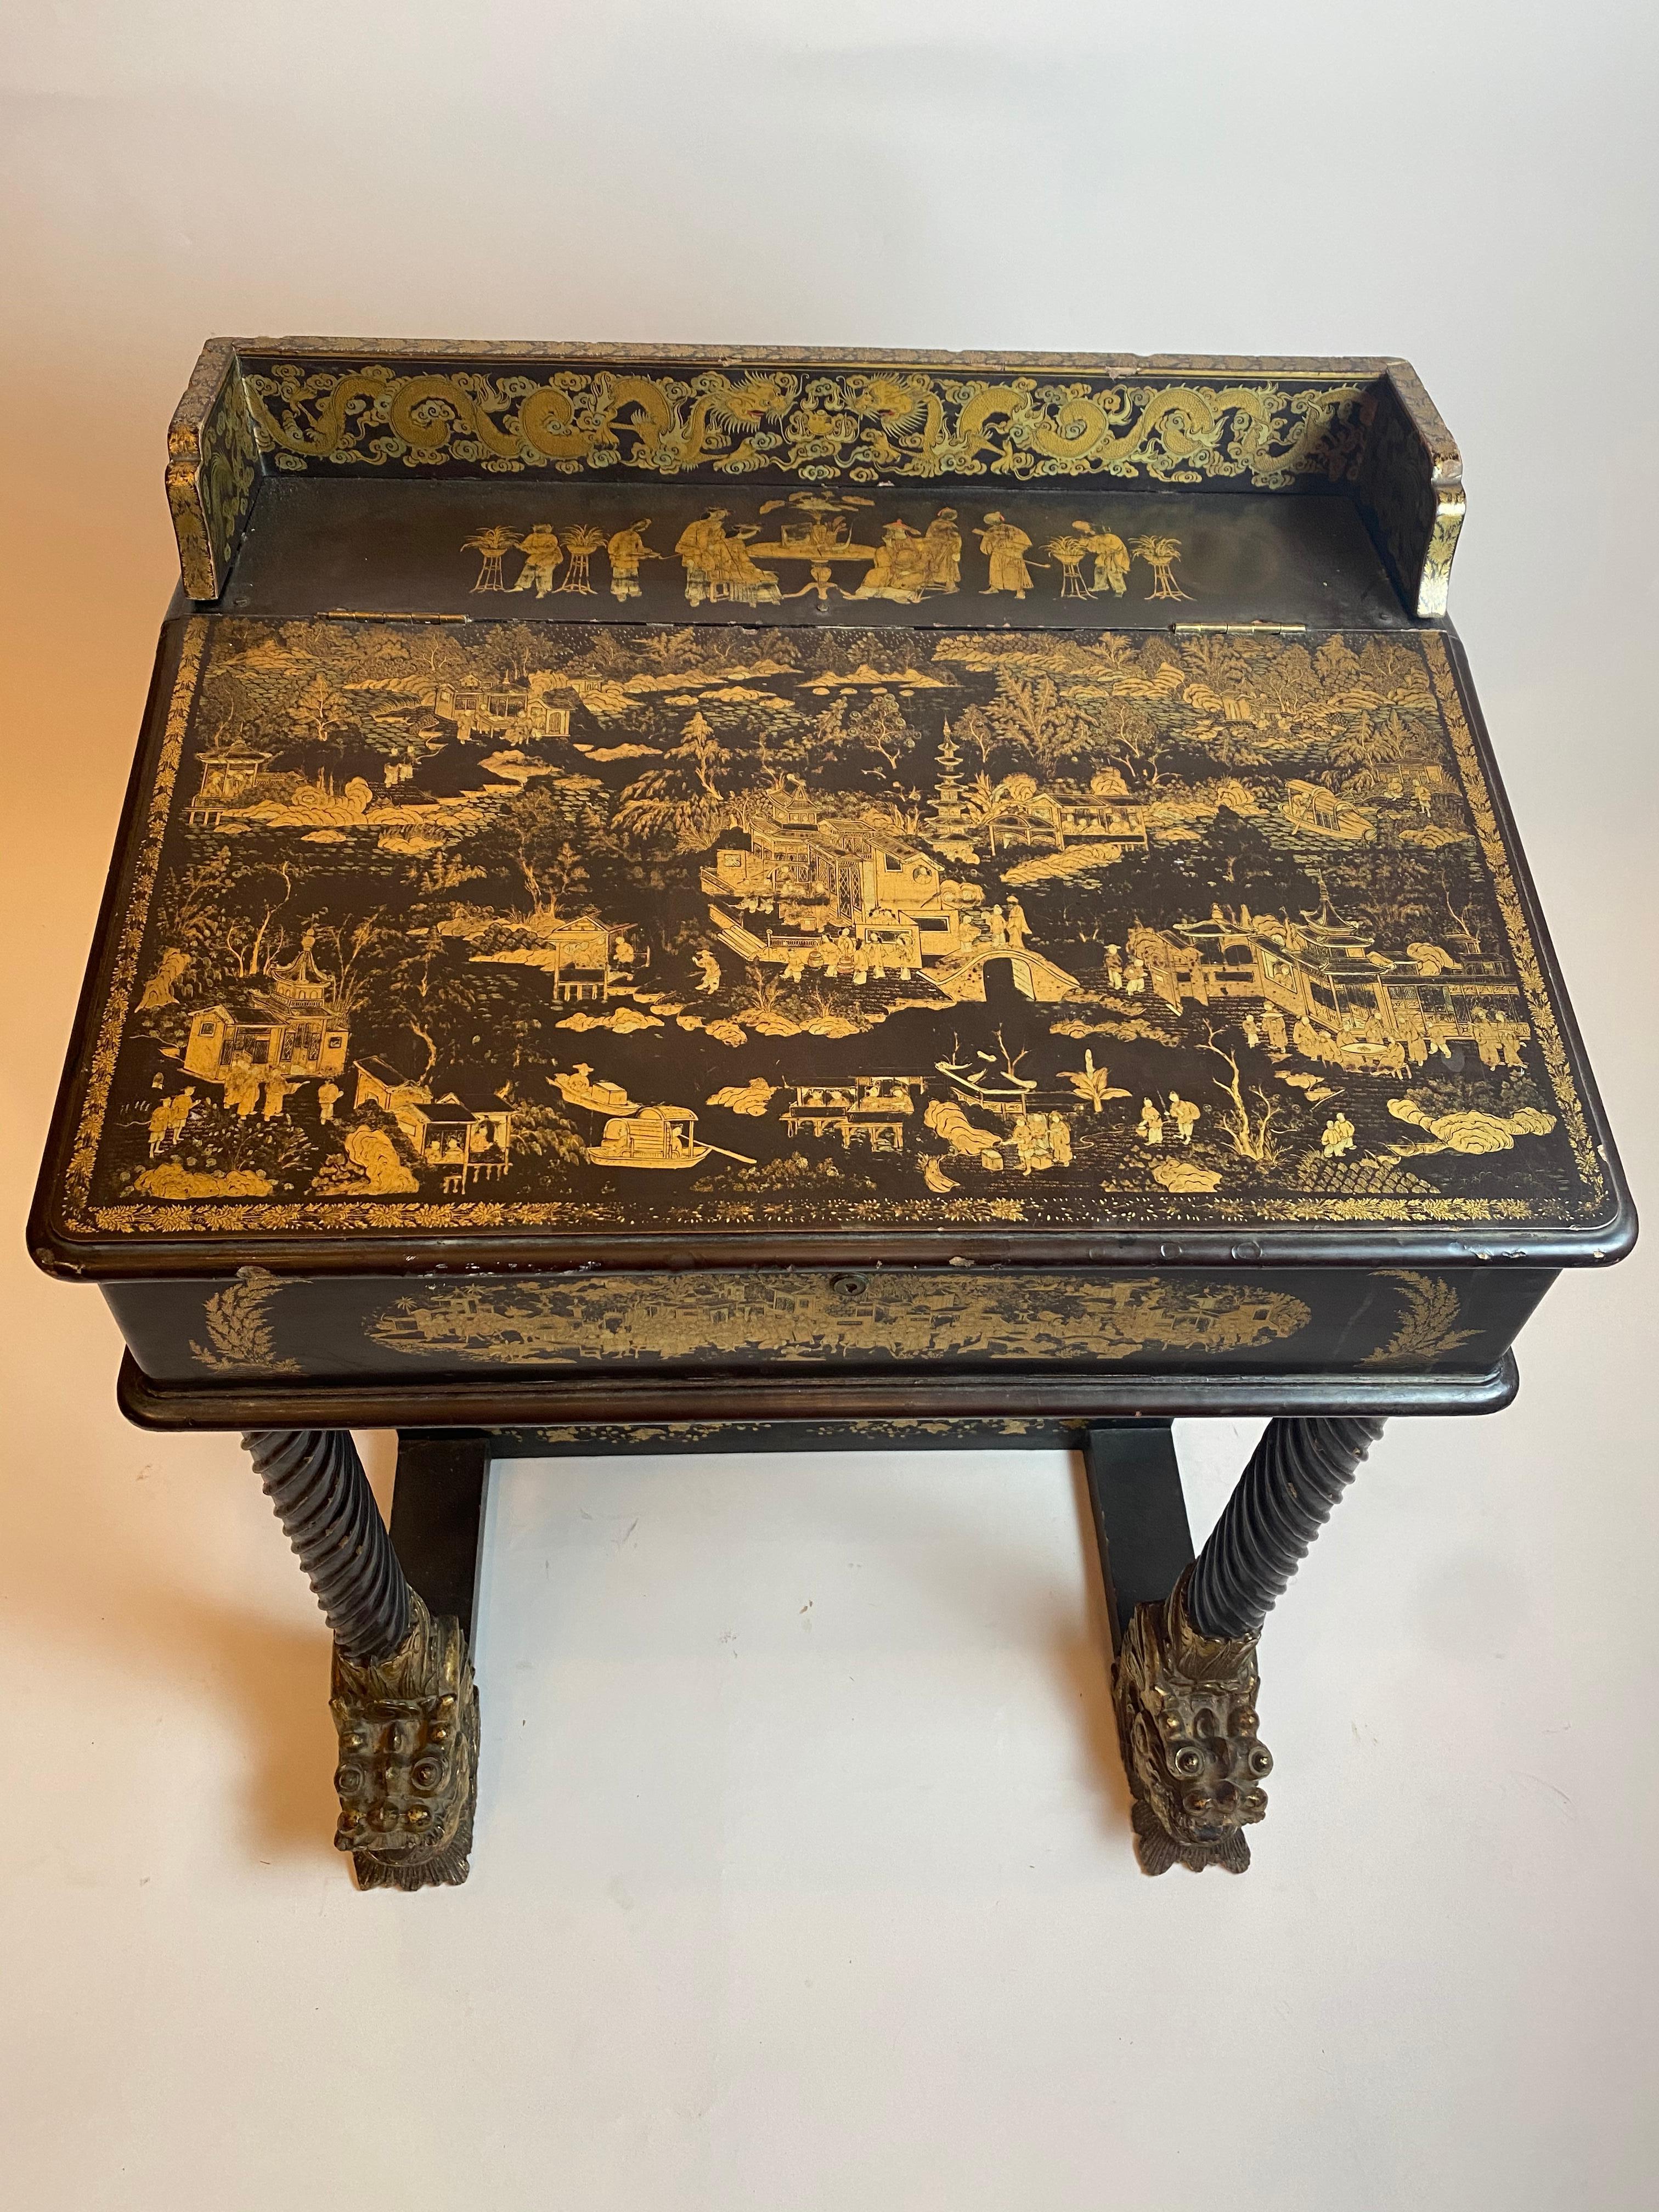 19th Century Chinese Export Lacquer and Gilt Davenport Desk In Good Condition For Sale In Brea, CA